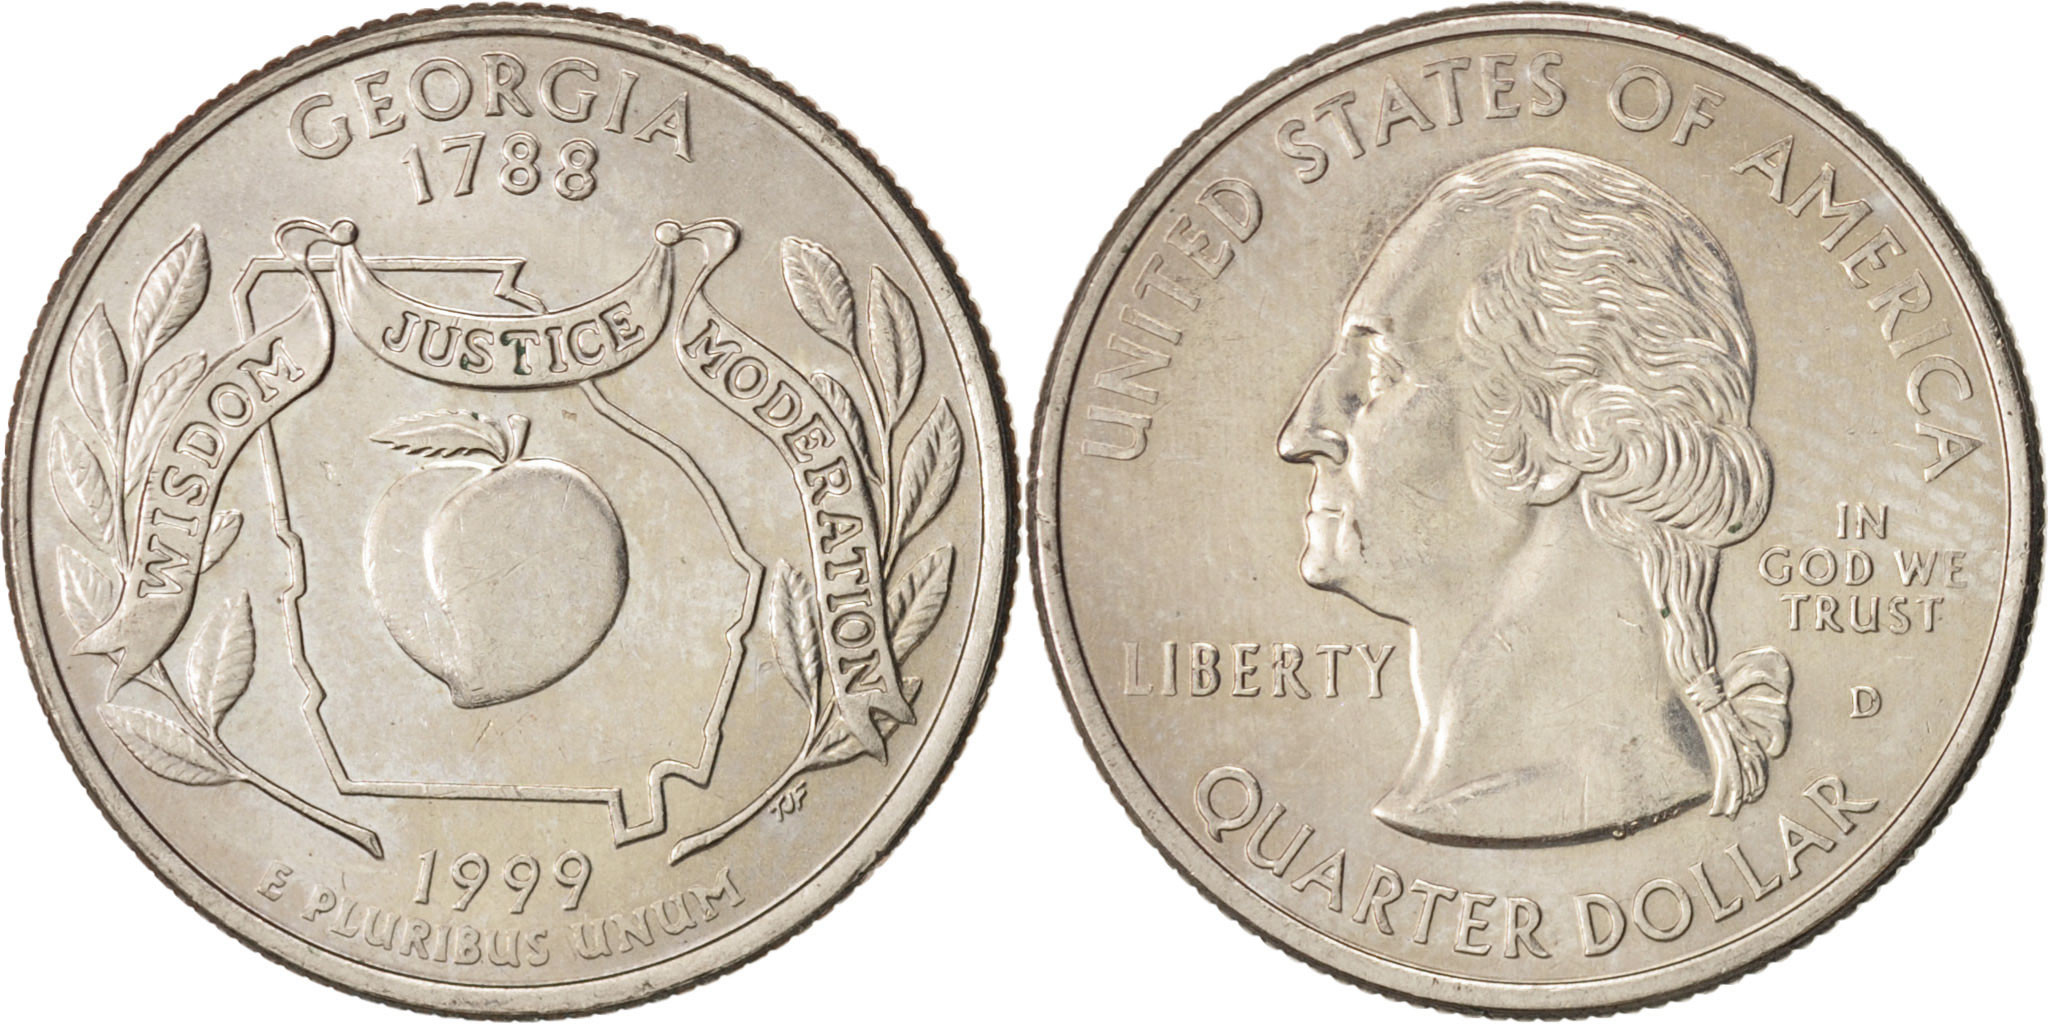 These quarters could be worth up to $10,000: How do I know if I have one? -  AS USA